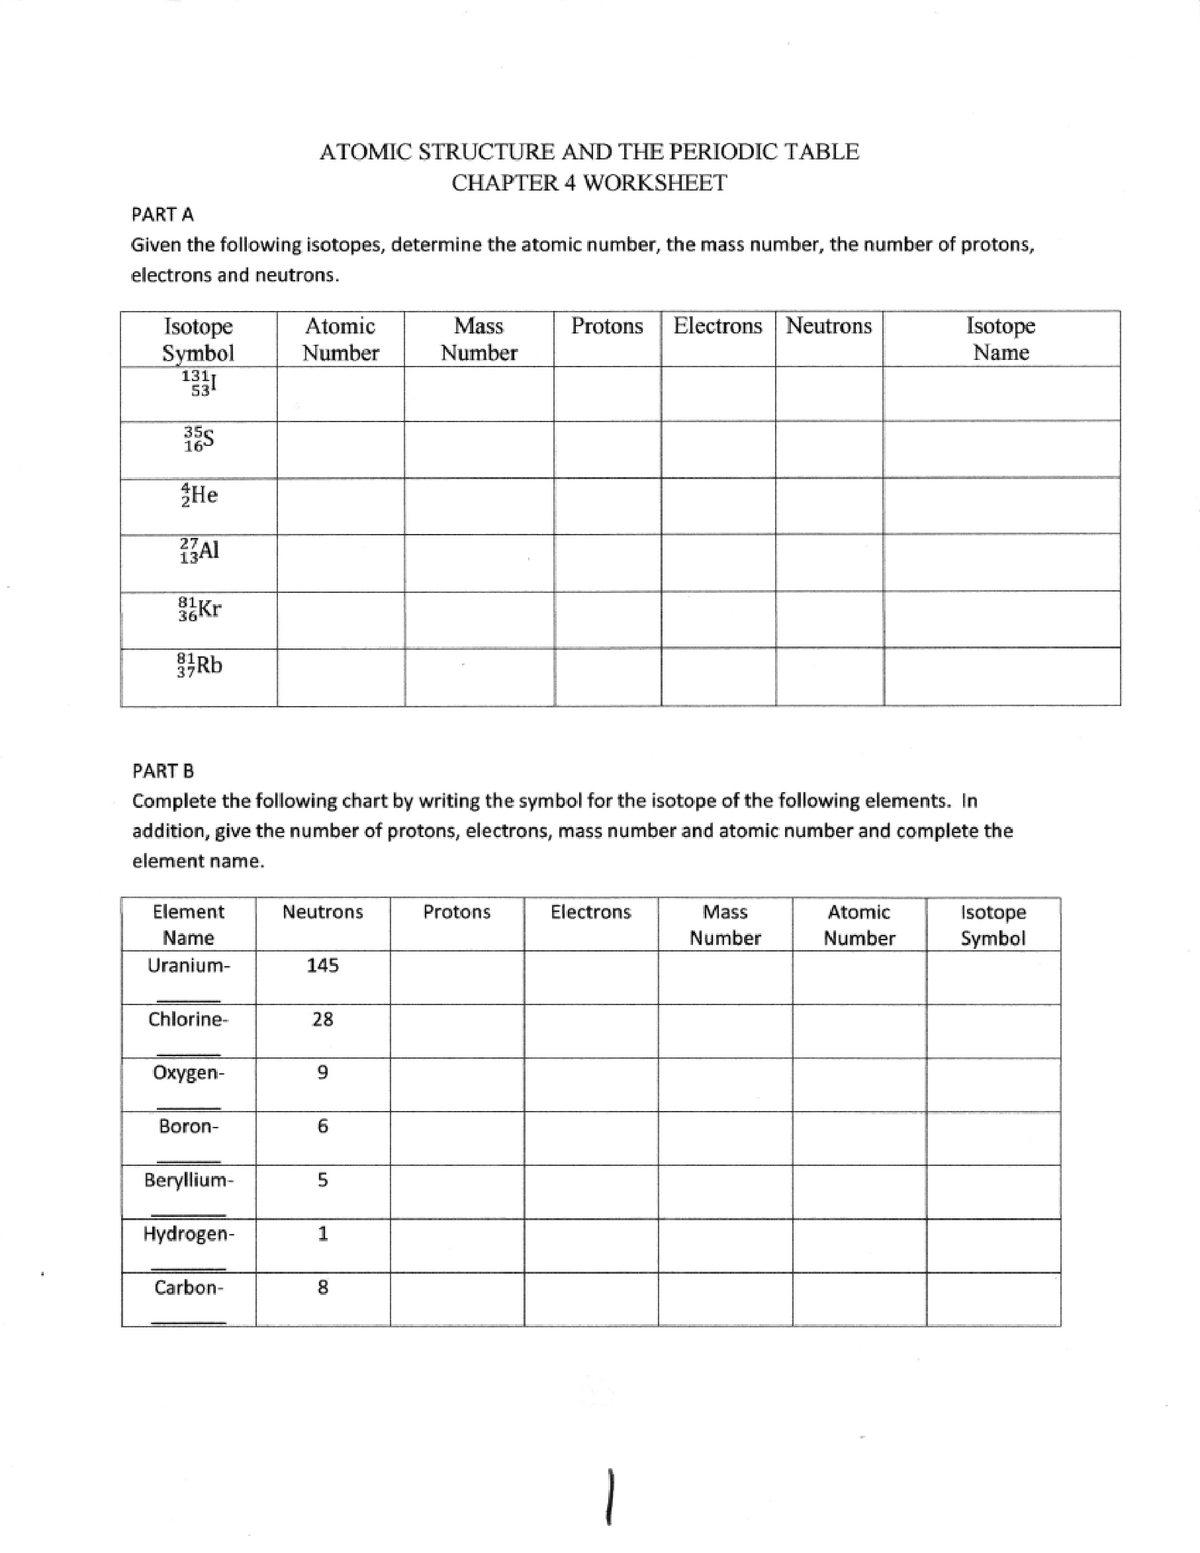 Isotope review packet - ATOMIC STRUCTURE AND THE PERIODIC TABLE For Periodic Table Review Worksheet